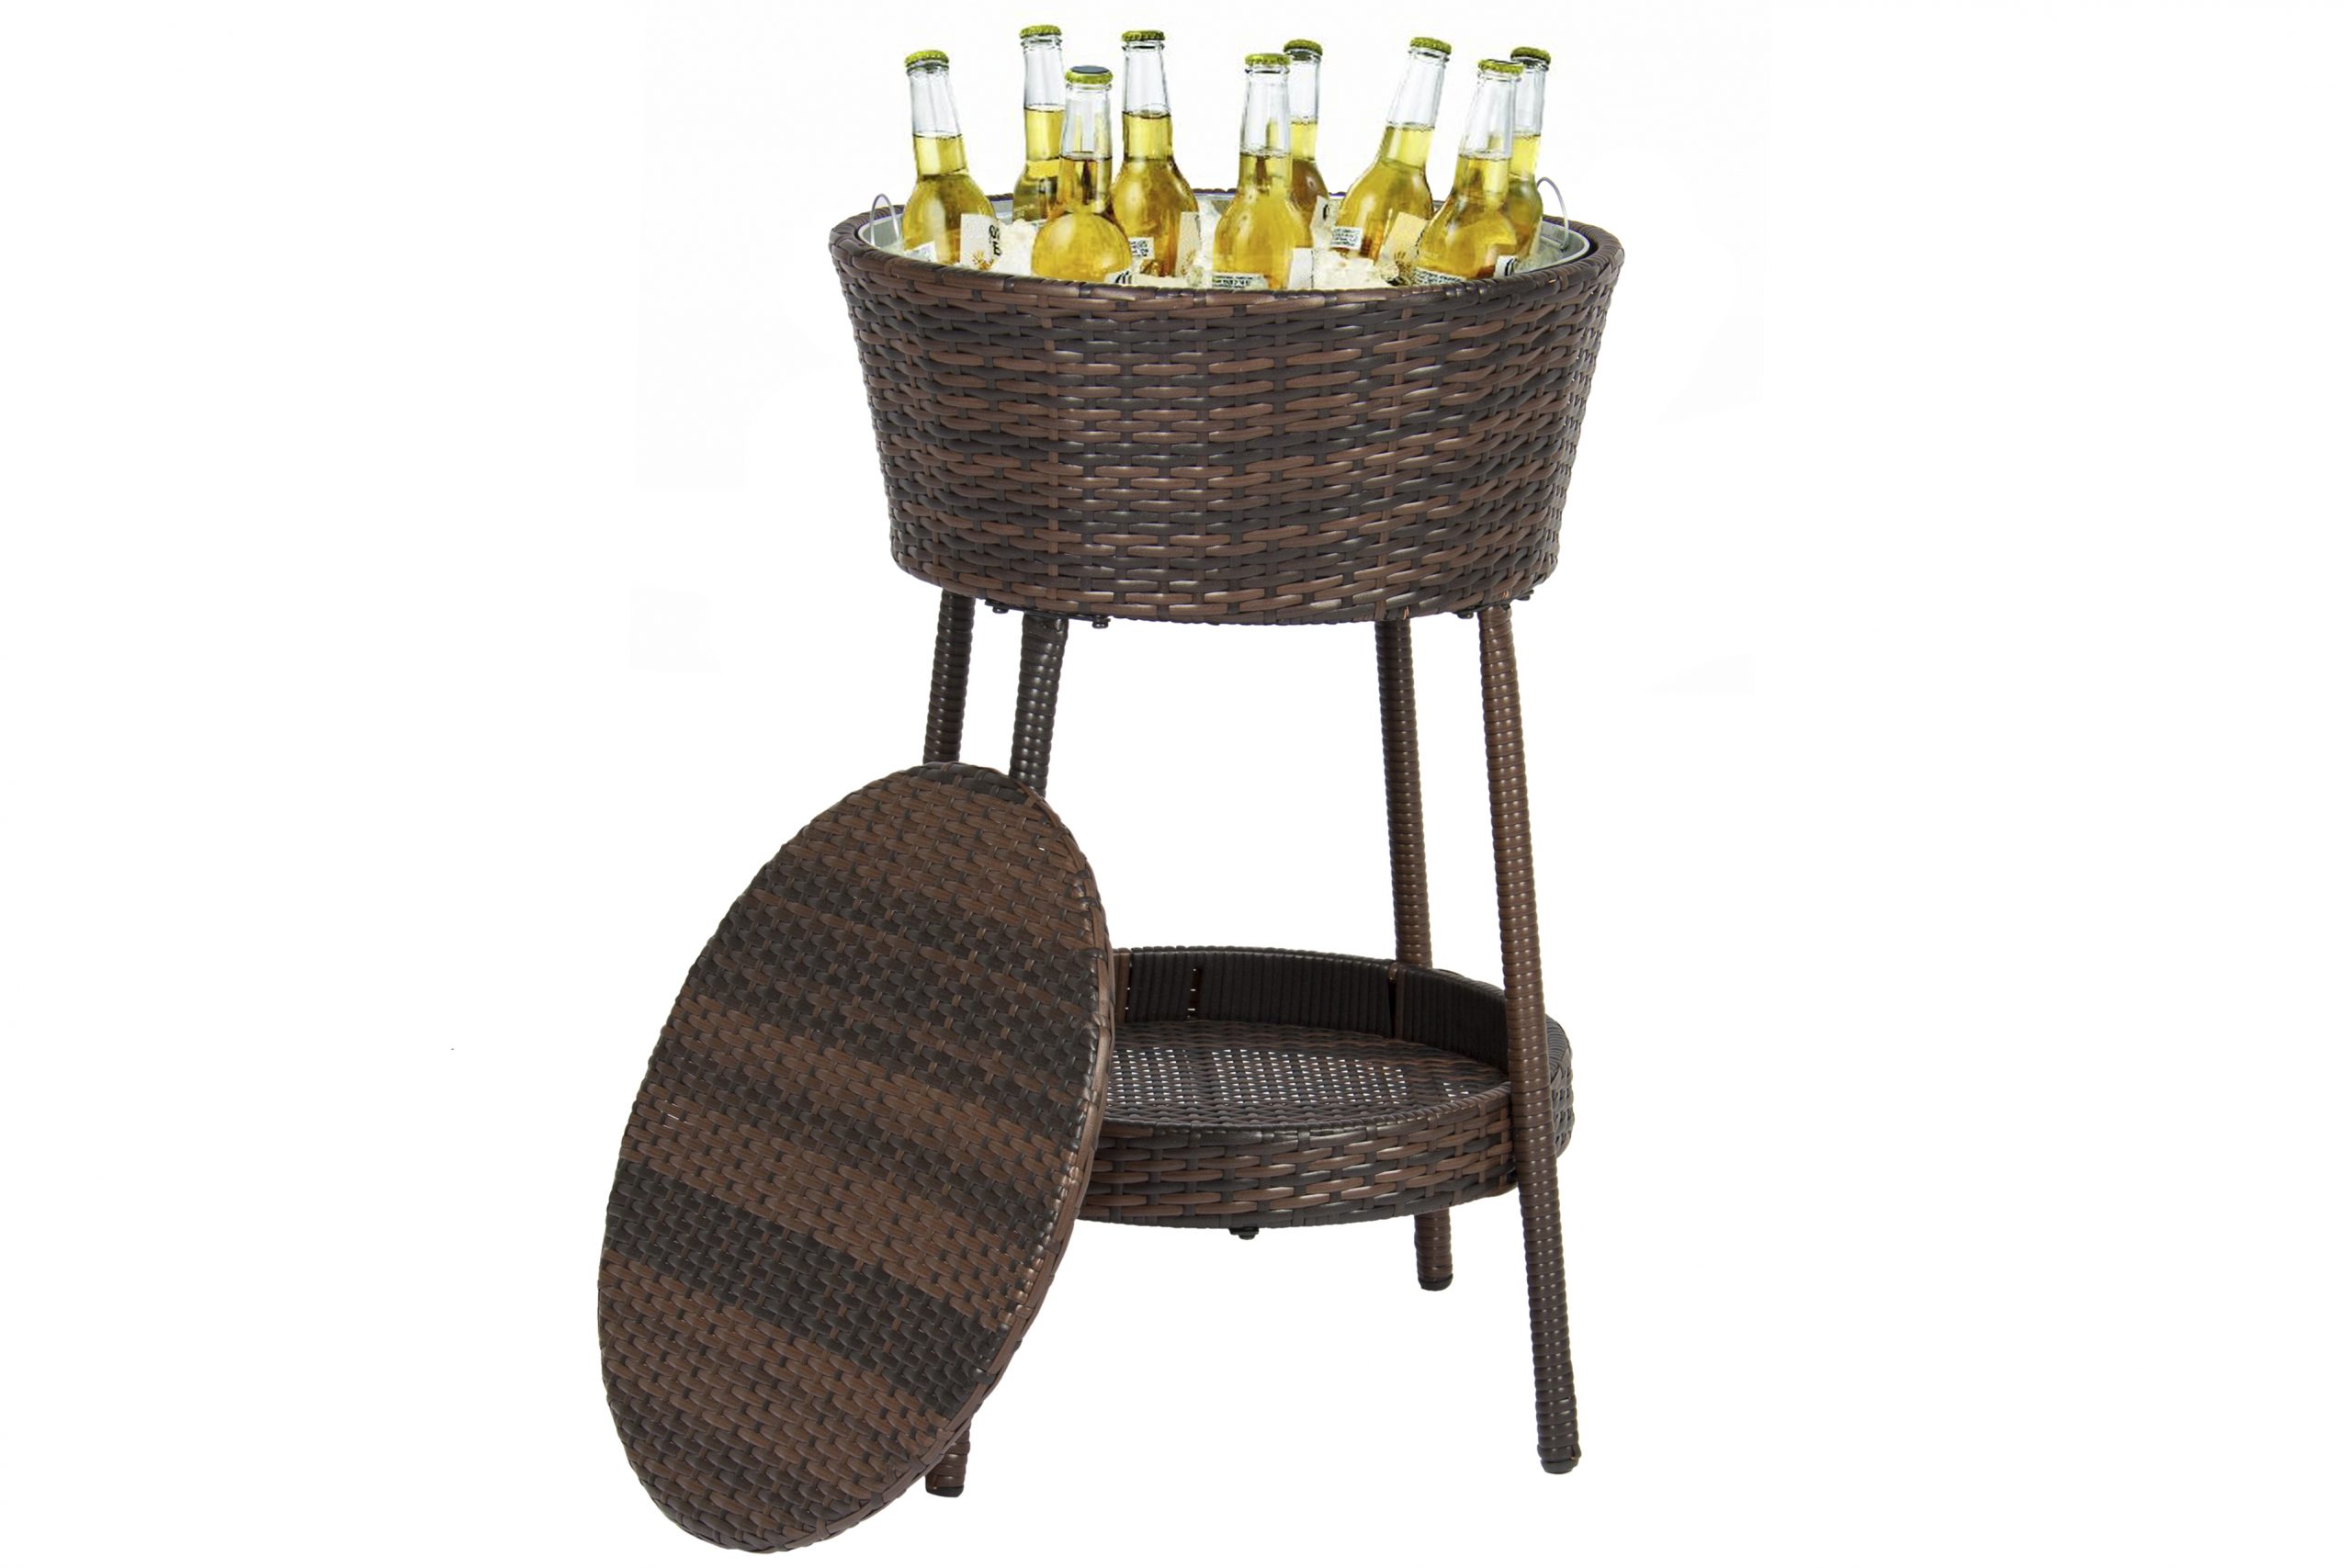 Outdoor All-Weather Patio Party Rattan Wicker Ice Bucket Cooler with Lid